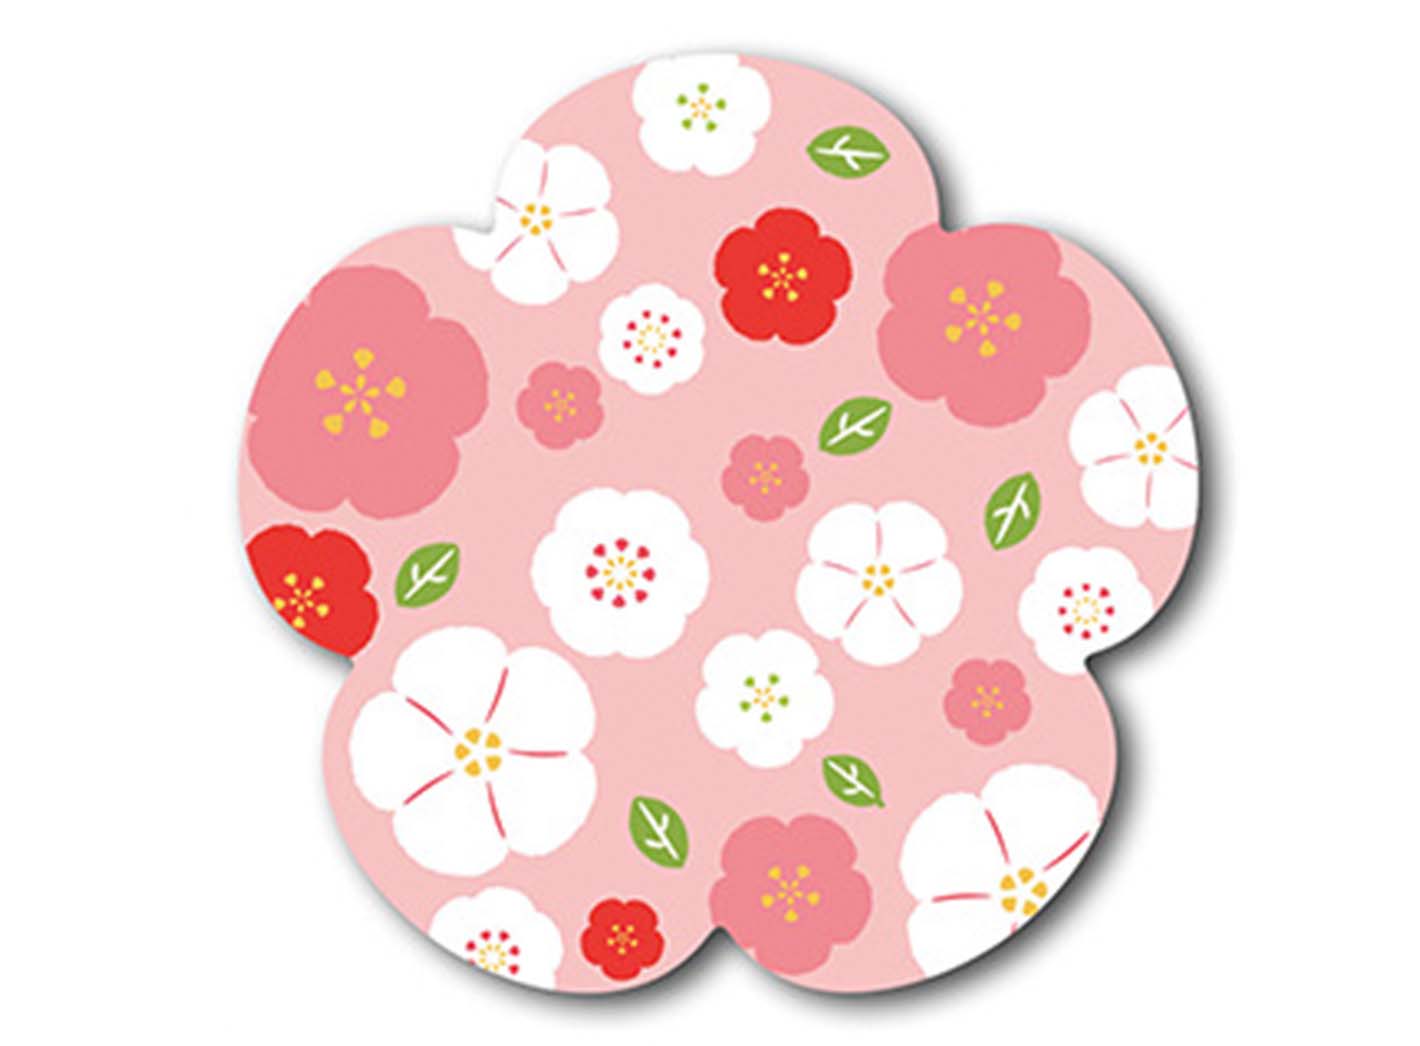 Flowery paper plate